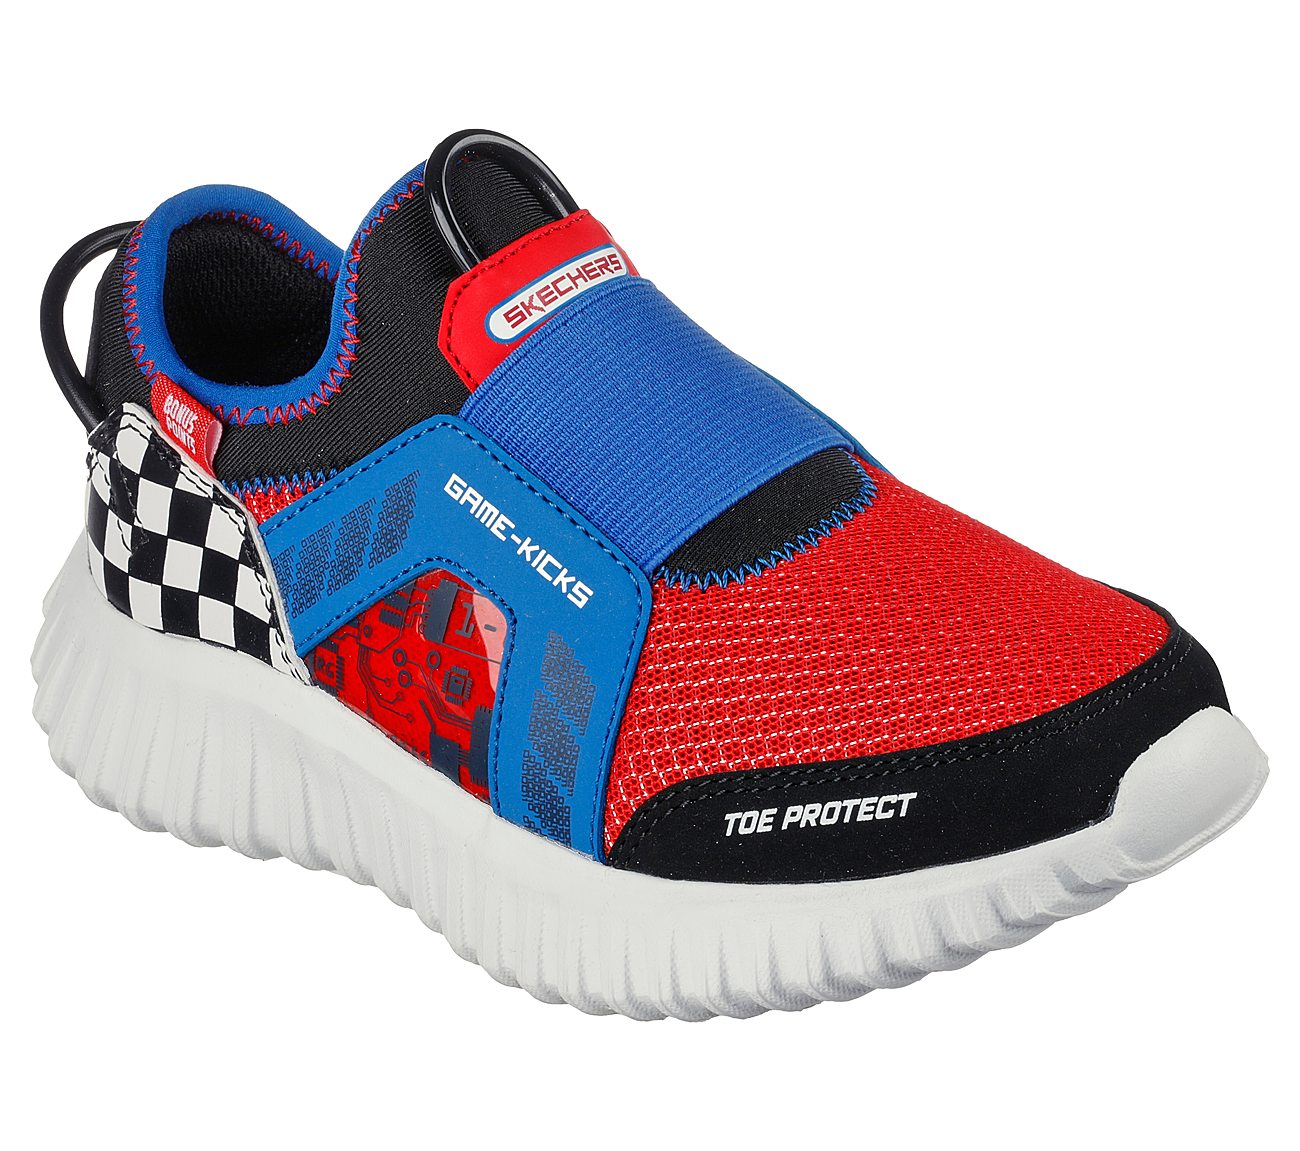 DEPTH CHARGE 2.0-DOUBLE POINT, BLUE/MULTI Footwear Right View